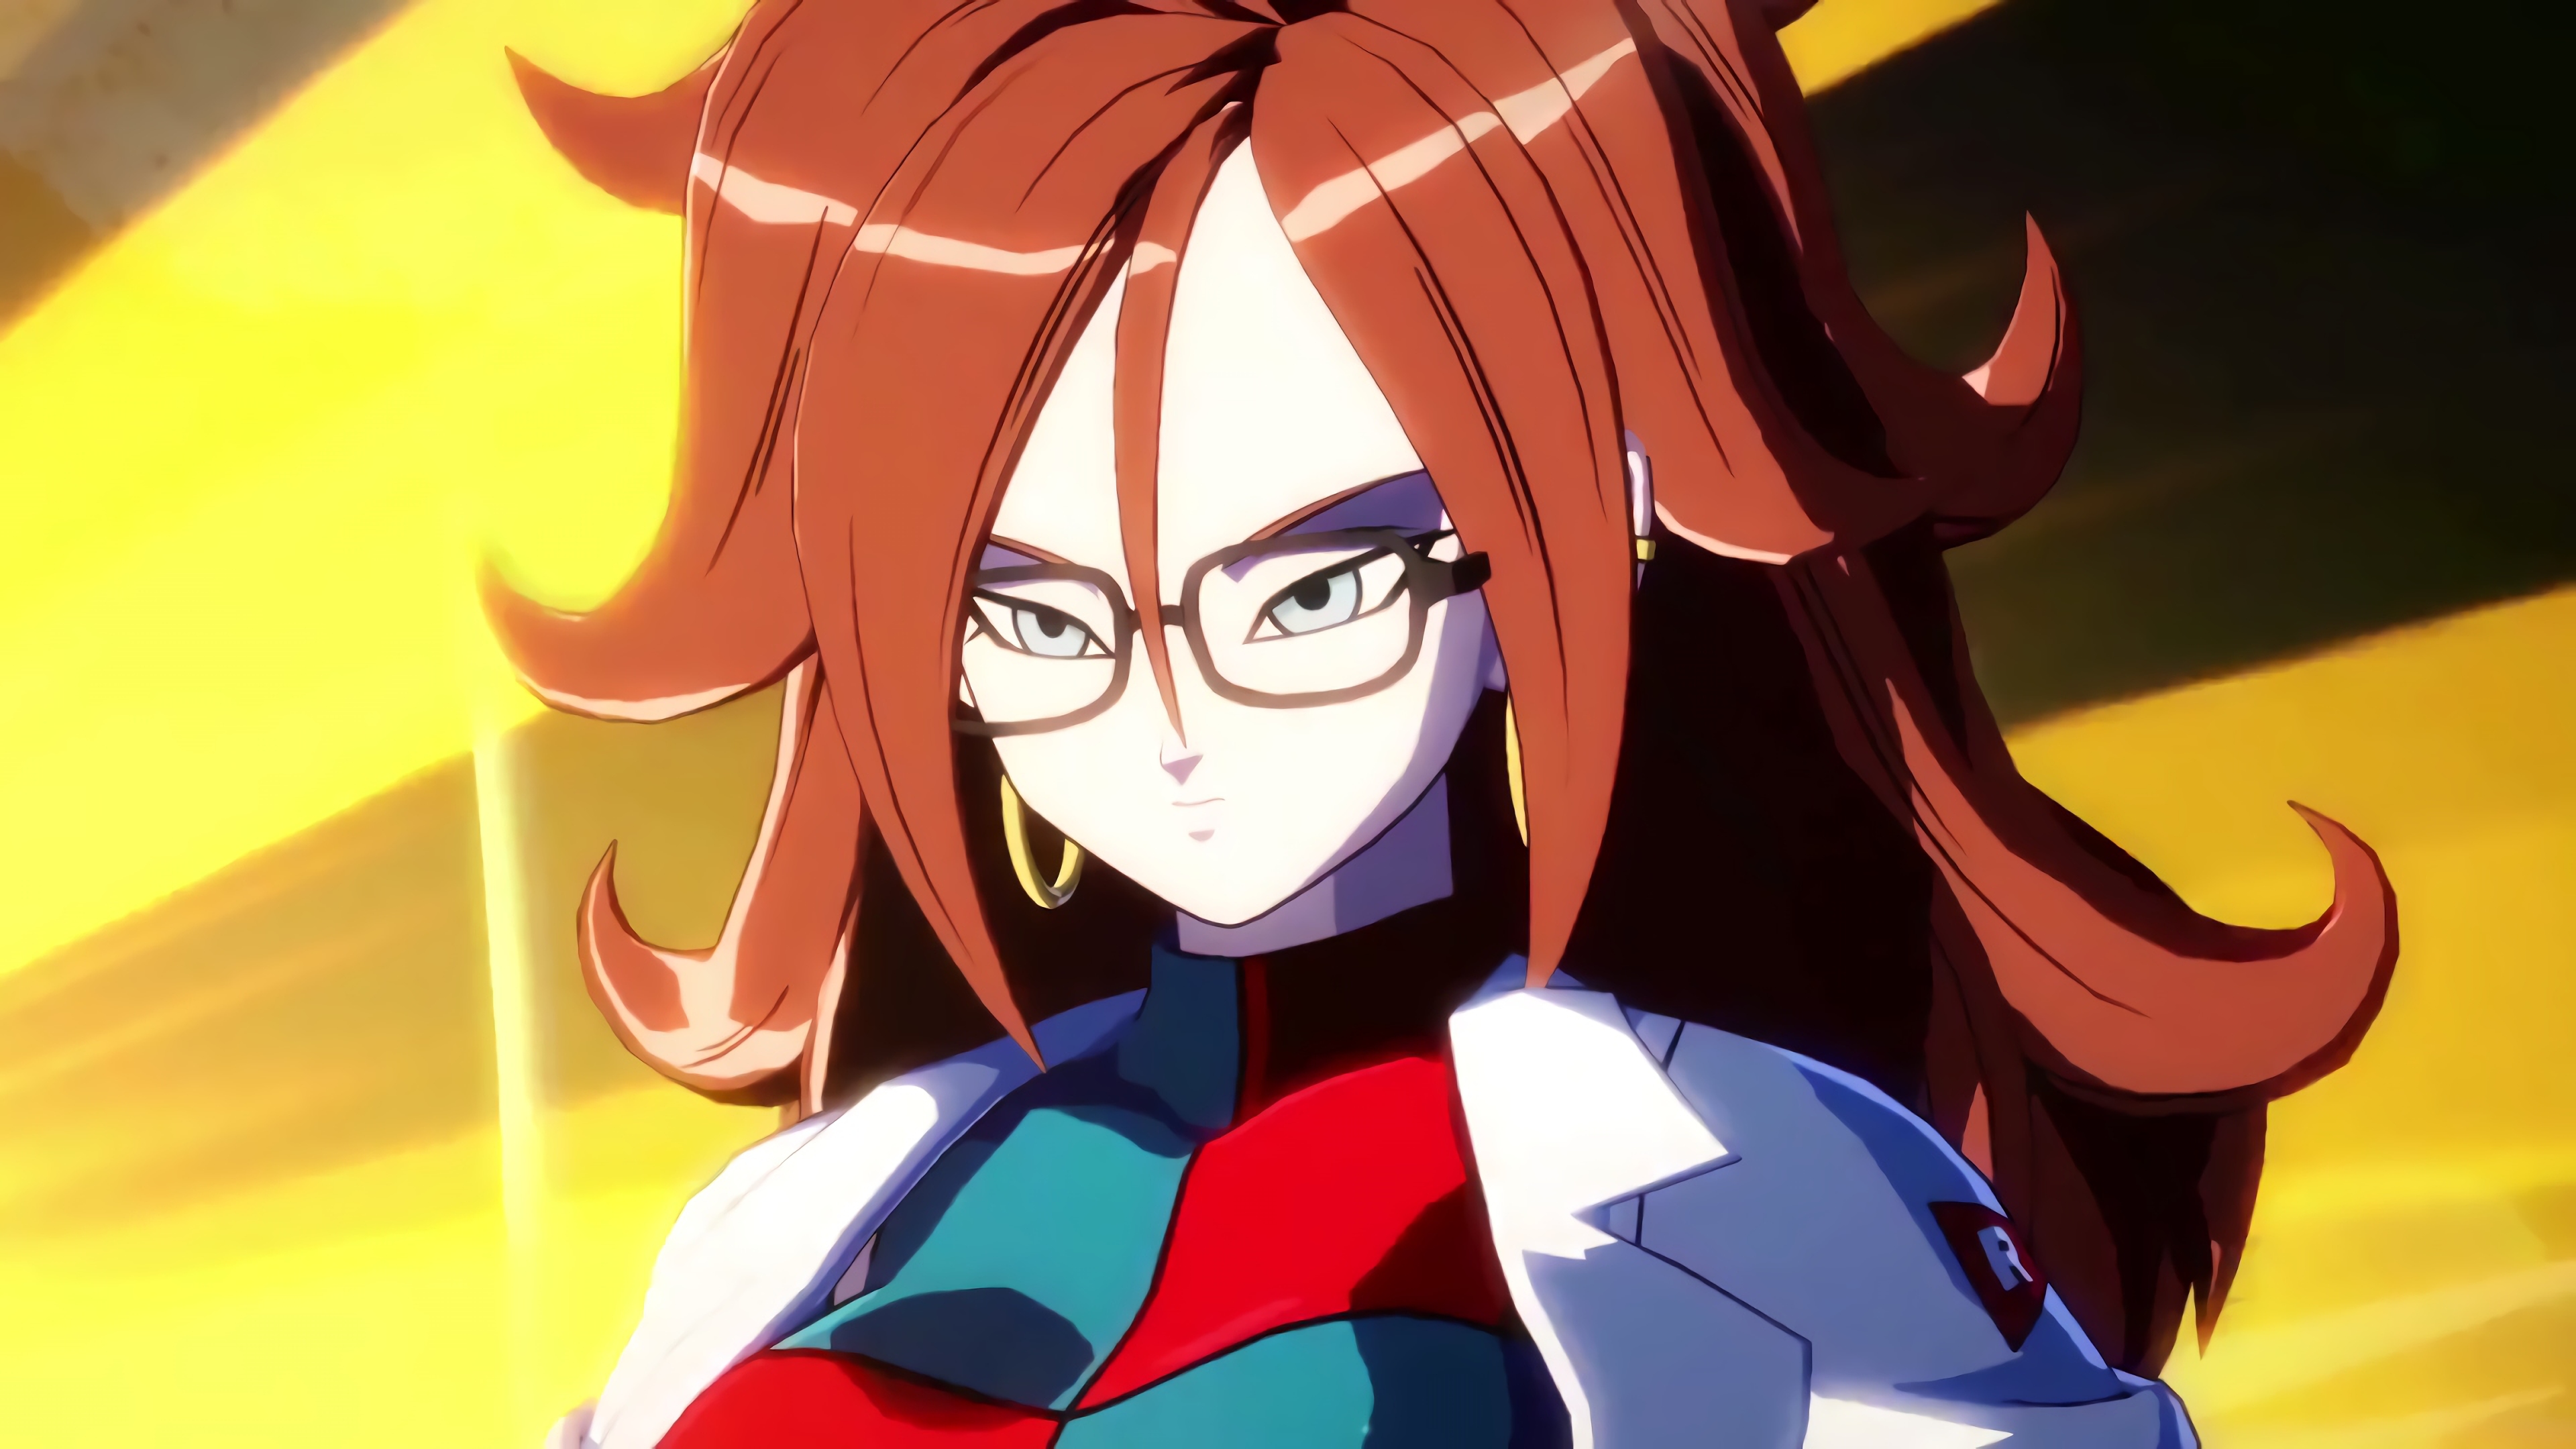 Android 21 BALL FighterZ